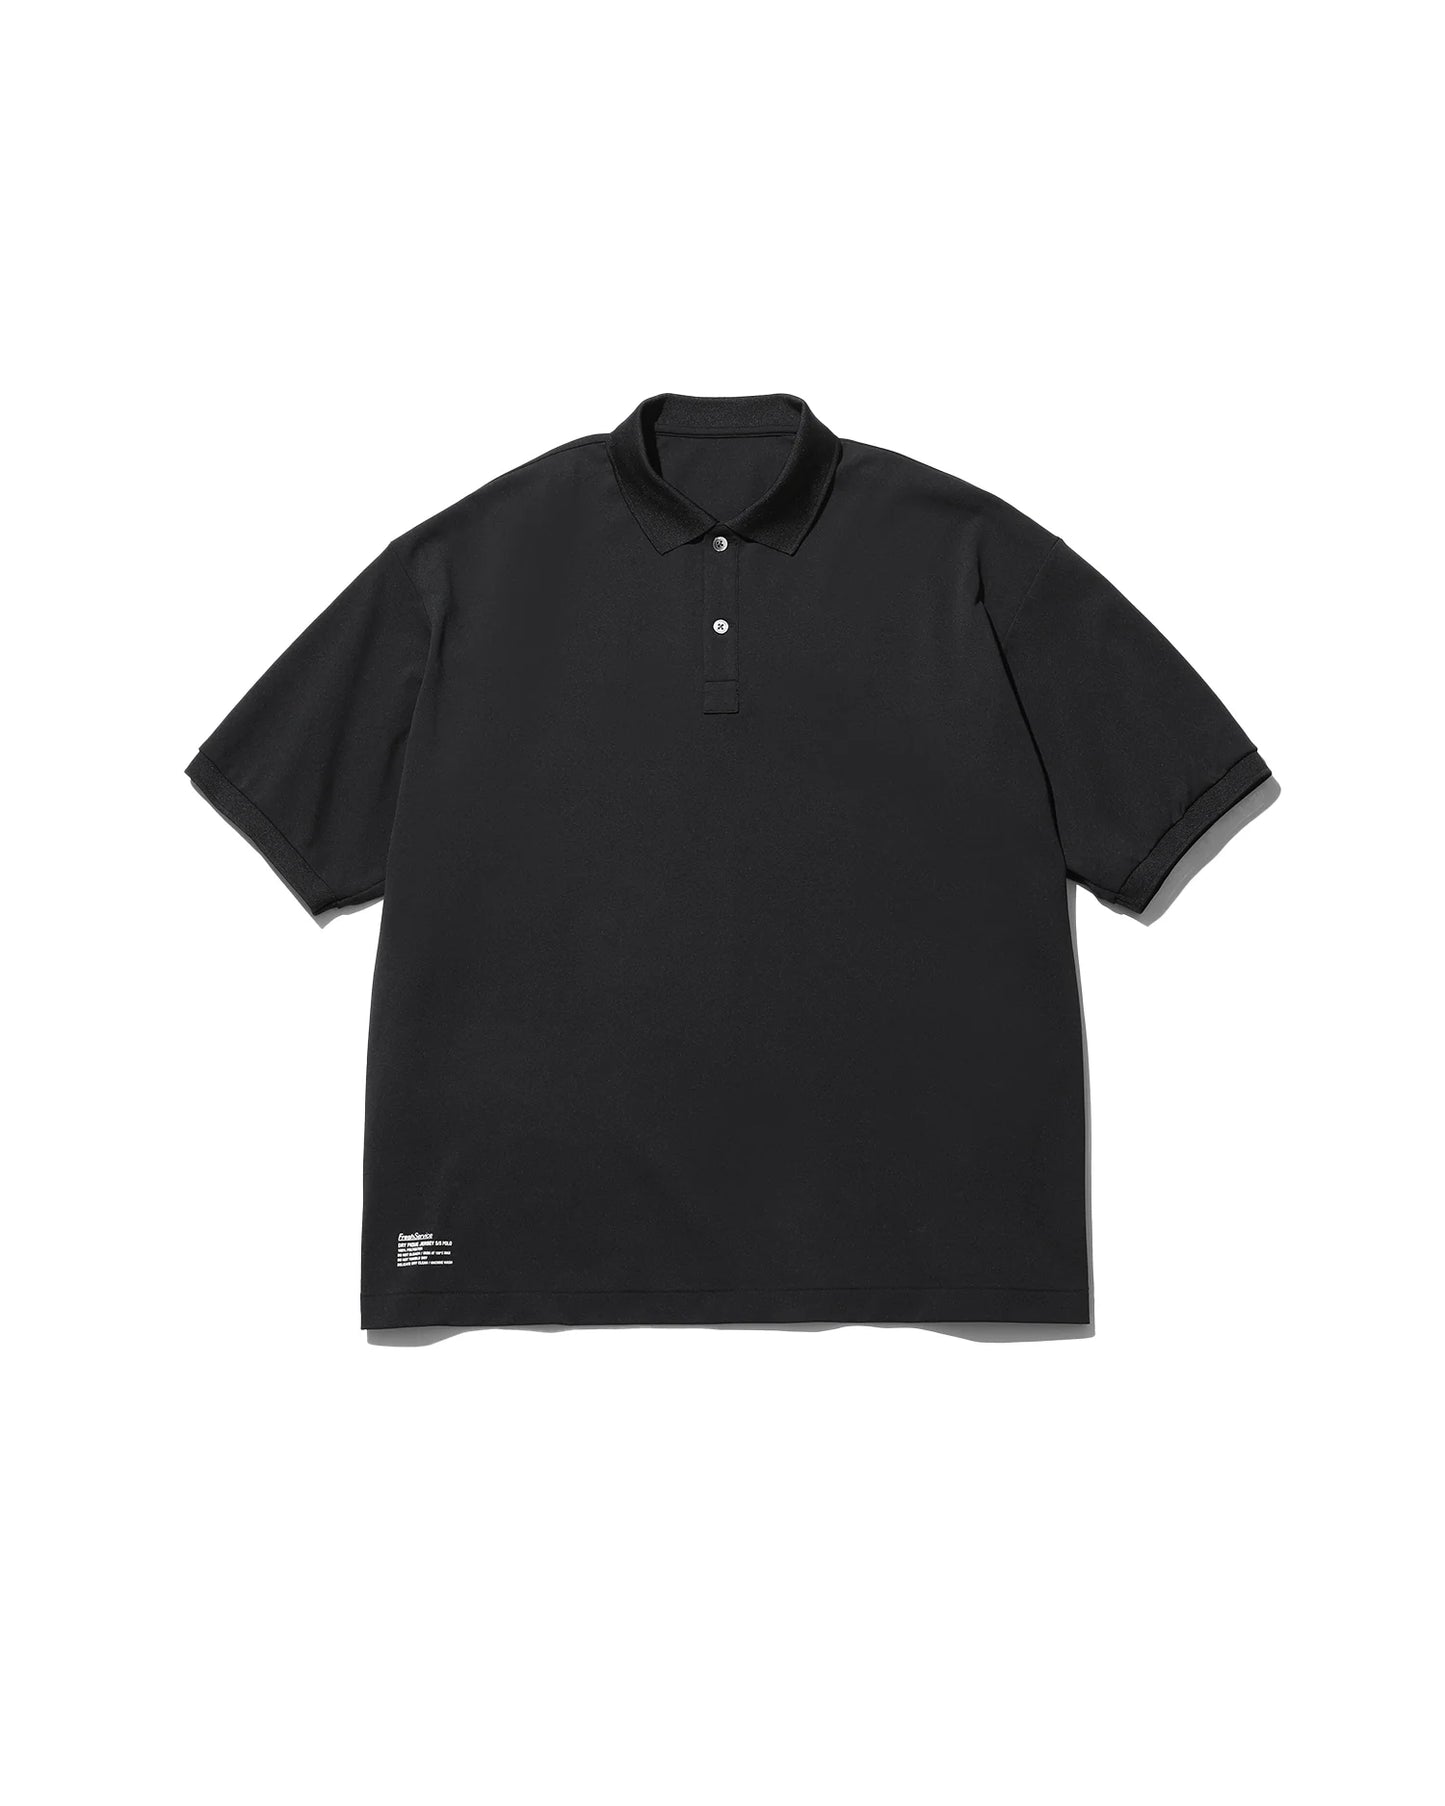 FreshService DRY PIQUE JERSEY S/S POLO